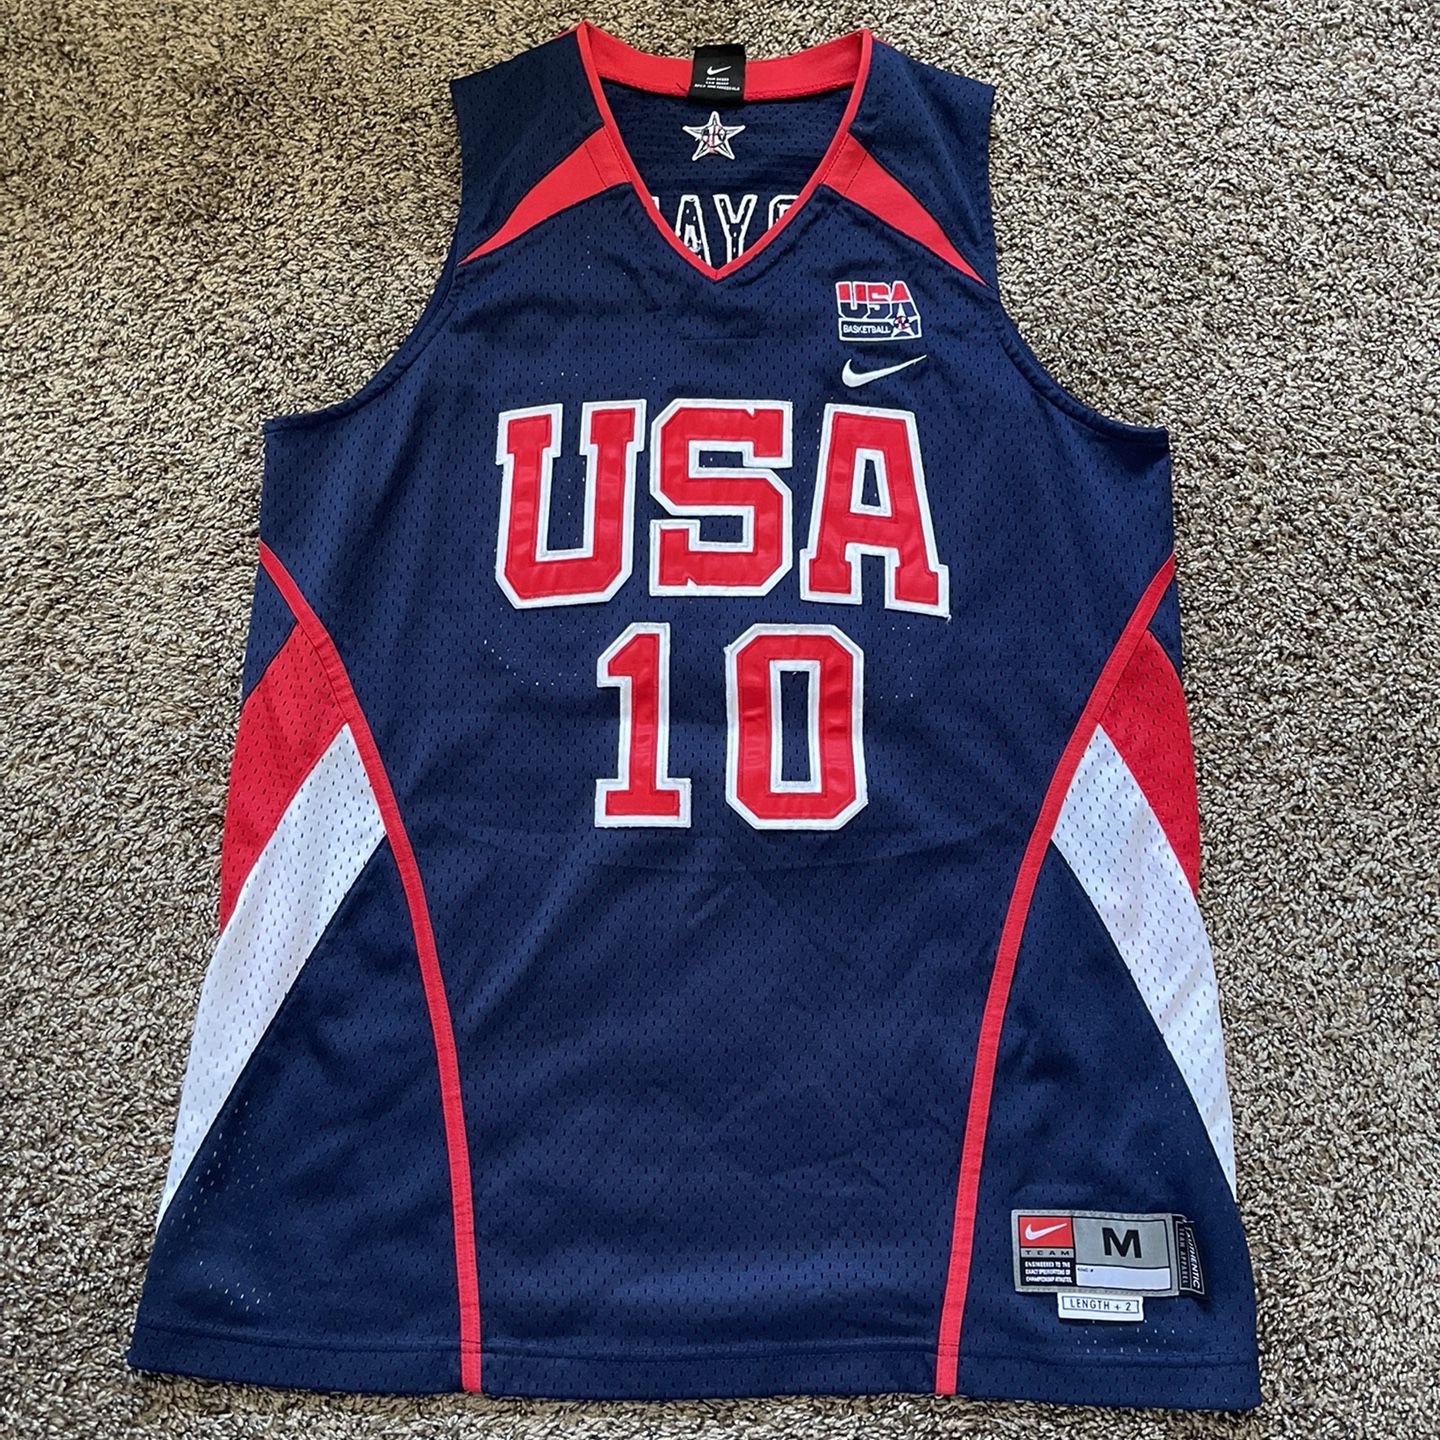 Kobe Bryant Dream Team USA Olympic Jersey #10 for Sale in Springfield, VA -  OfferUp